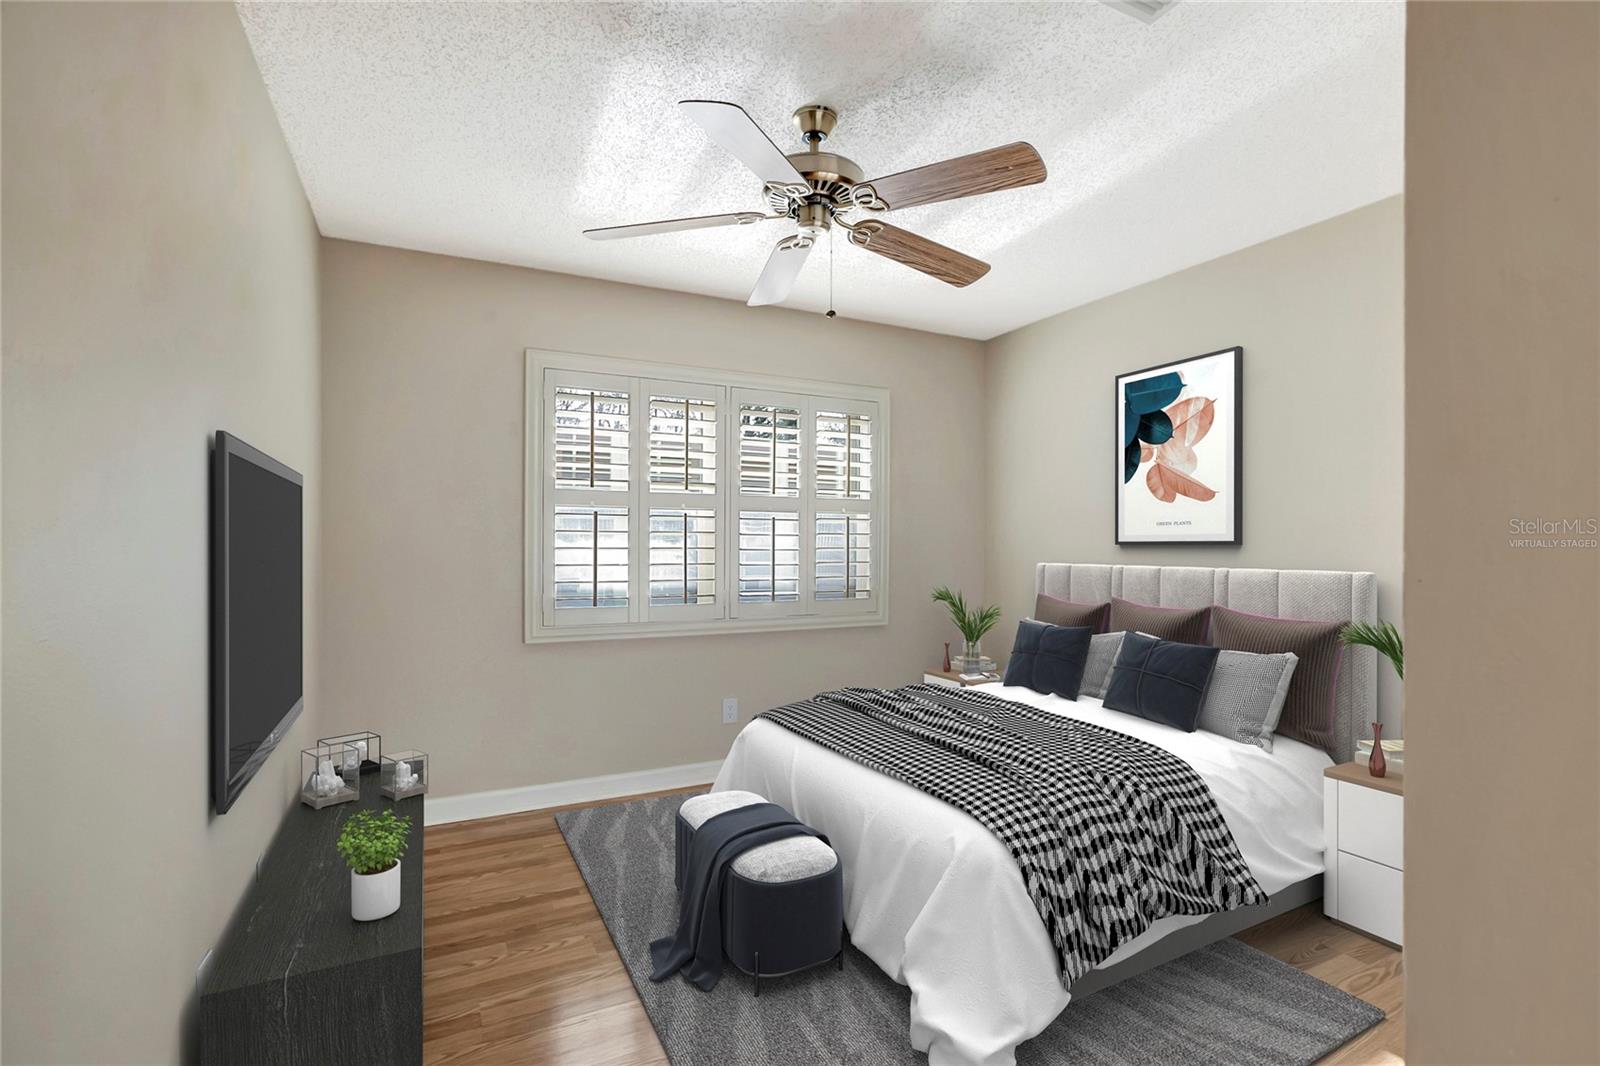 Virtually staged guest bedroom